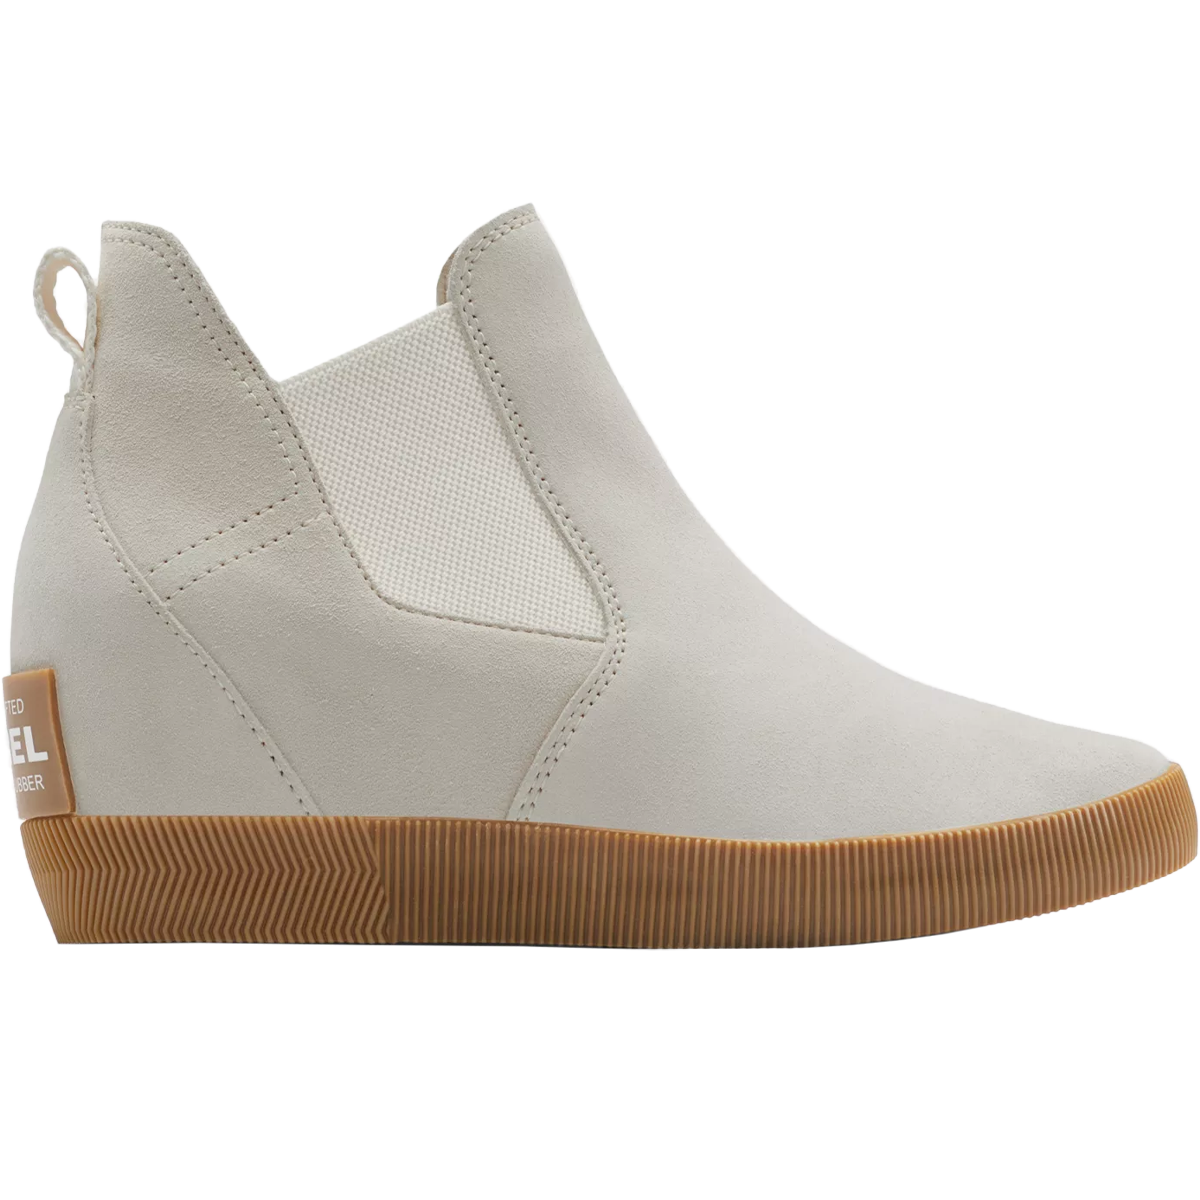 Women's Out N About Slip-On Wedge alternate view